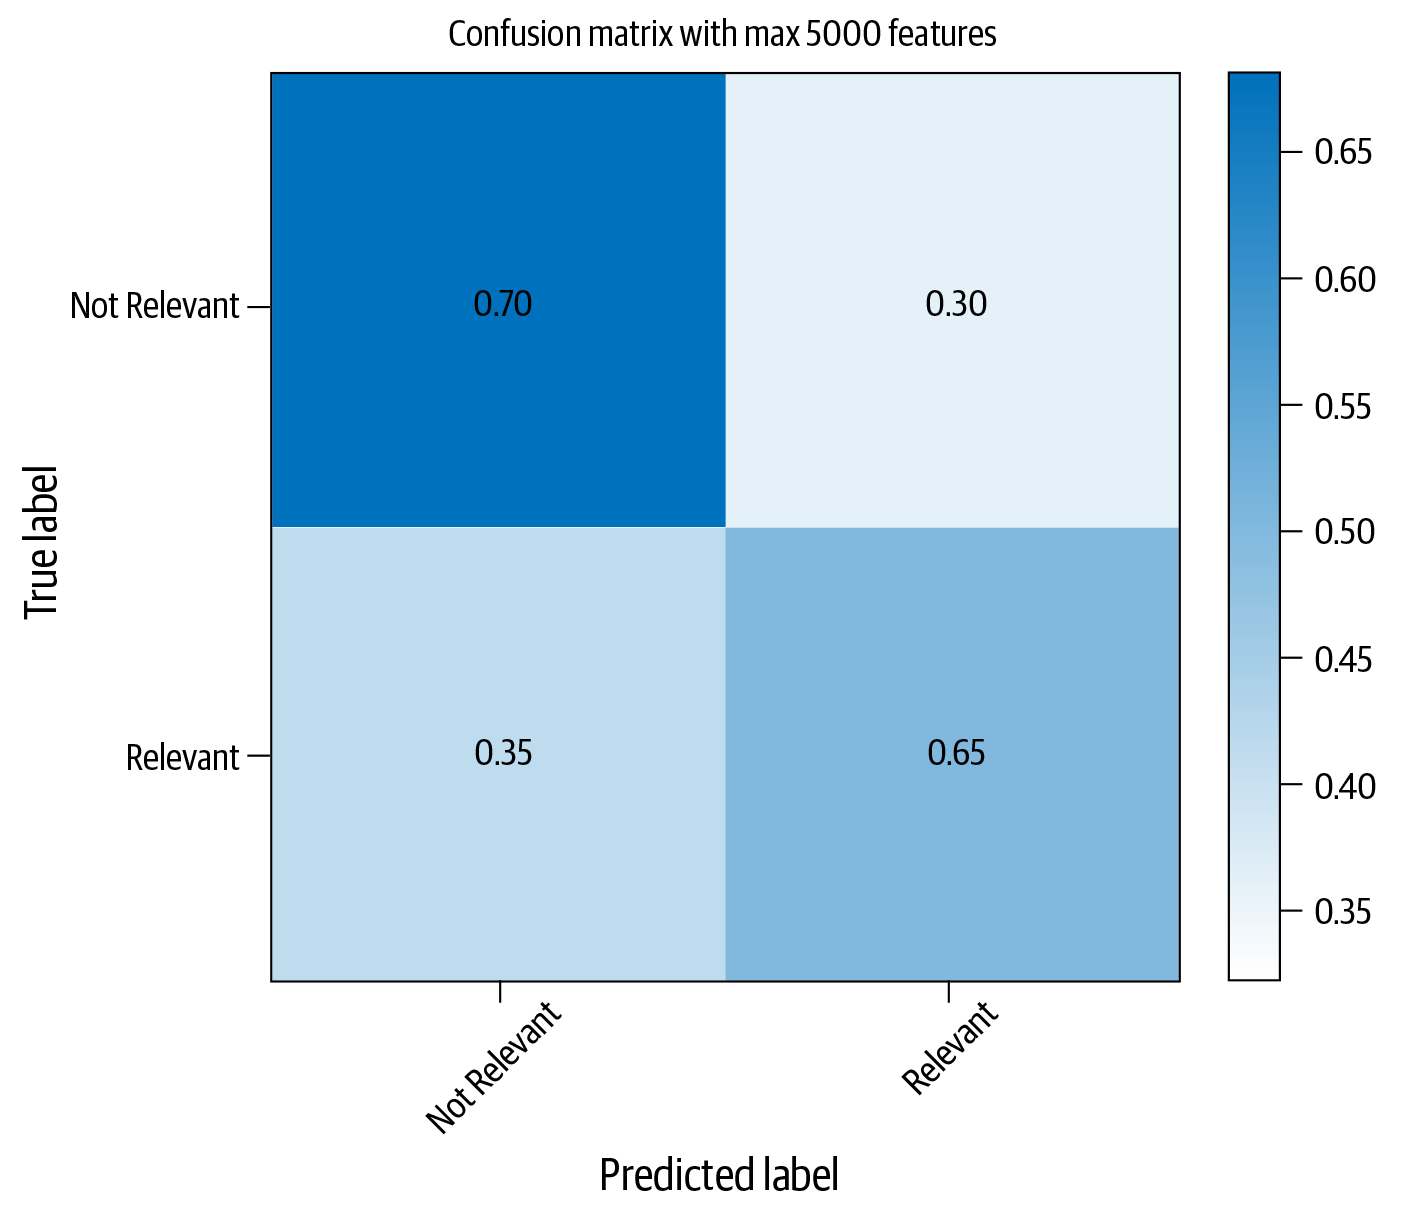 Improved classification performance with Naive Bayes and feature selection